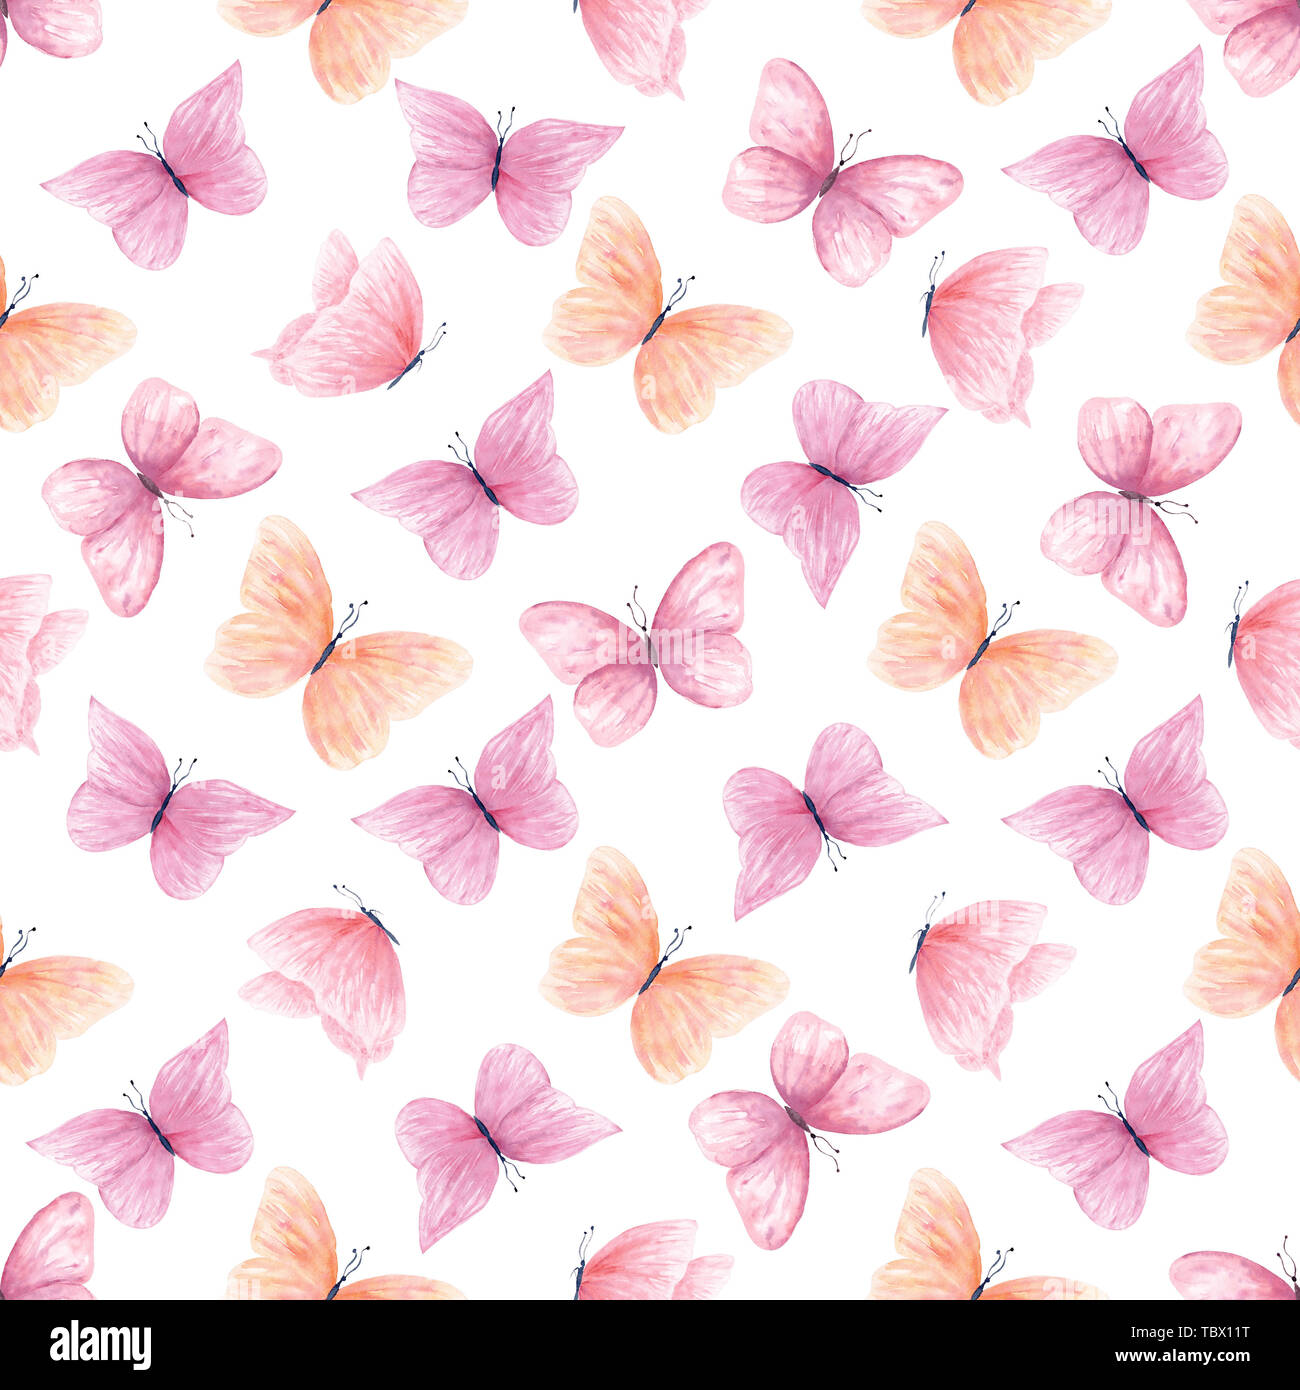 Colorful butterflies watercolor seamless pattern Stock Photo